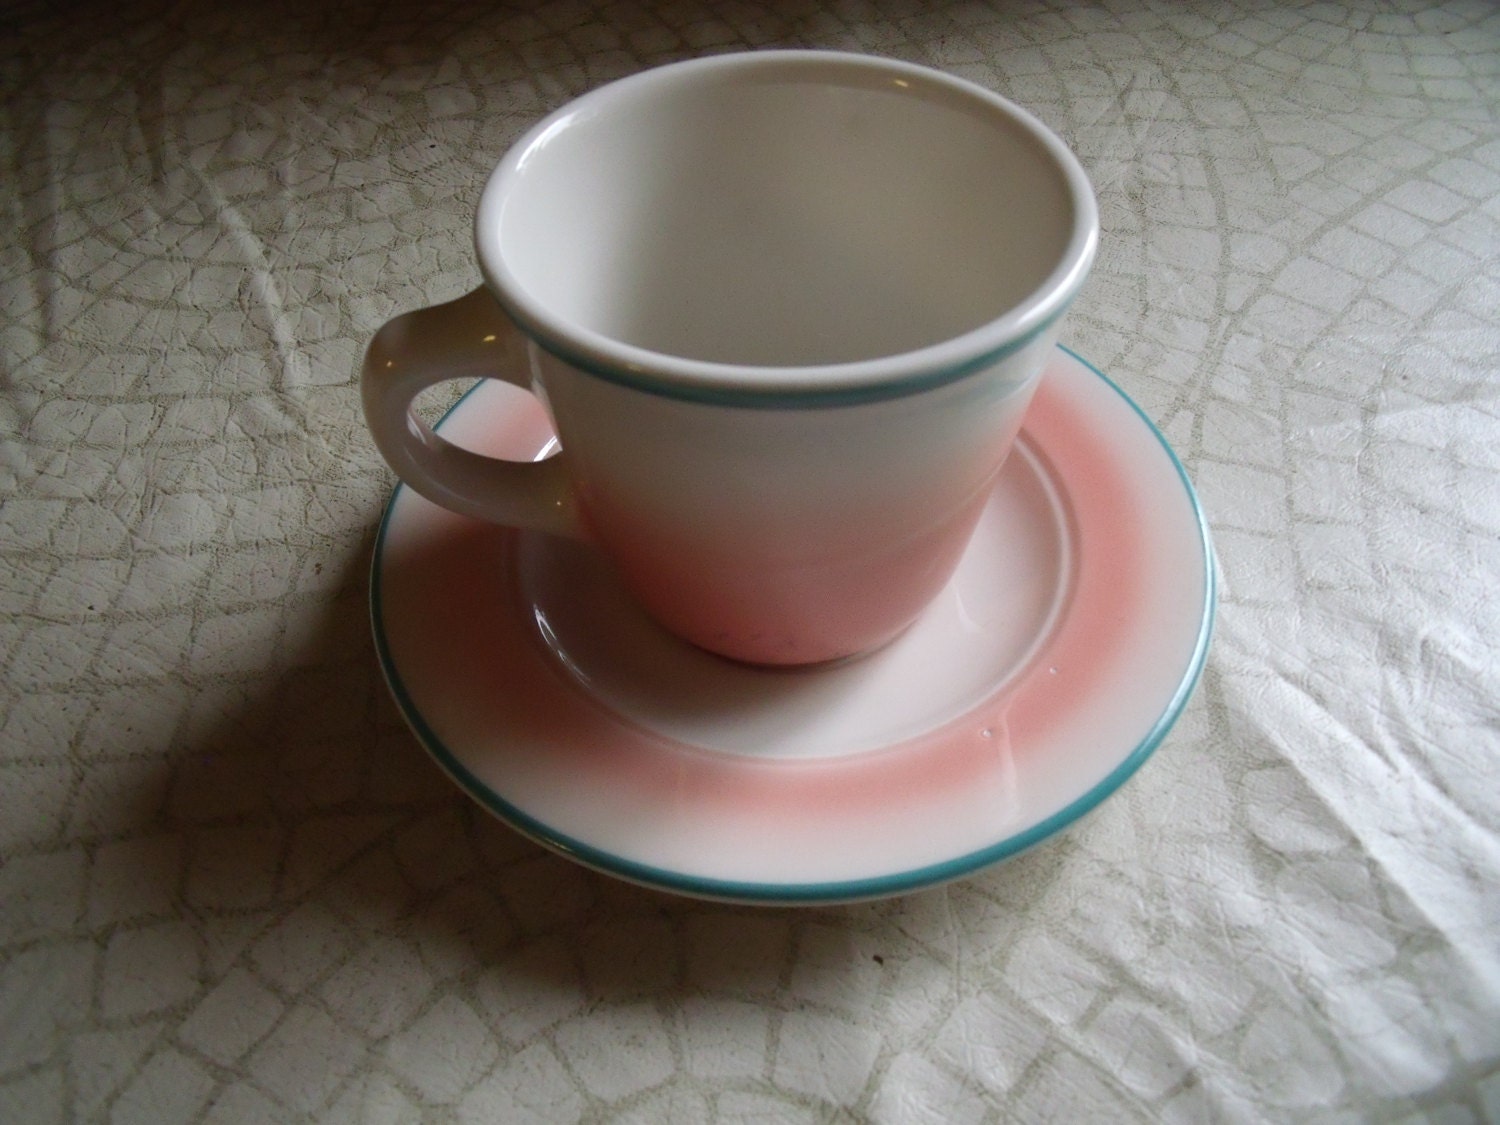 Collectible 1990s HOMER LAUGHLIN Cup And Saucer Pink With Aqua Trim Restaurant Wear EED-1